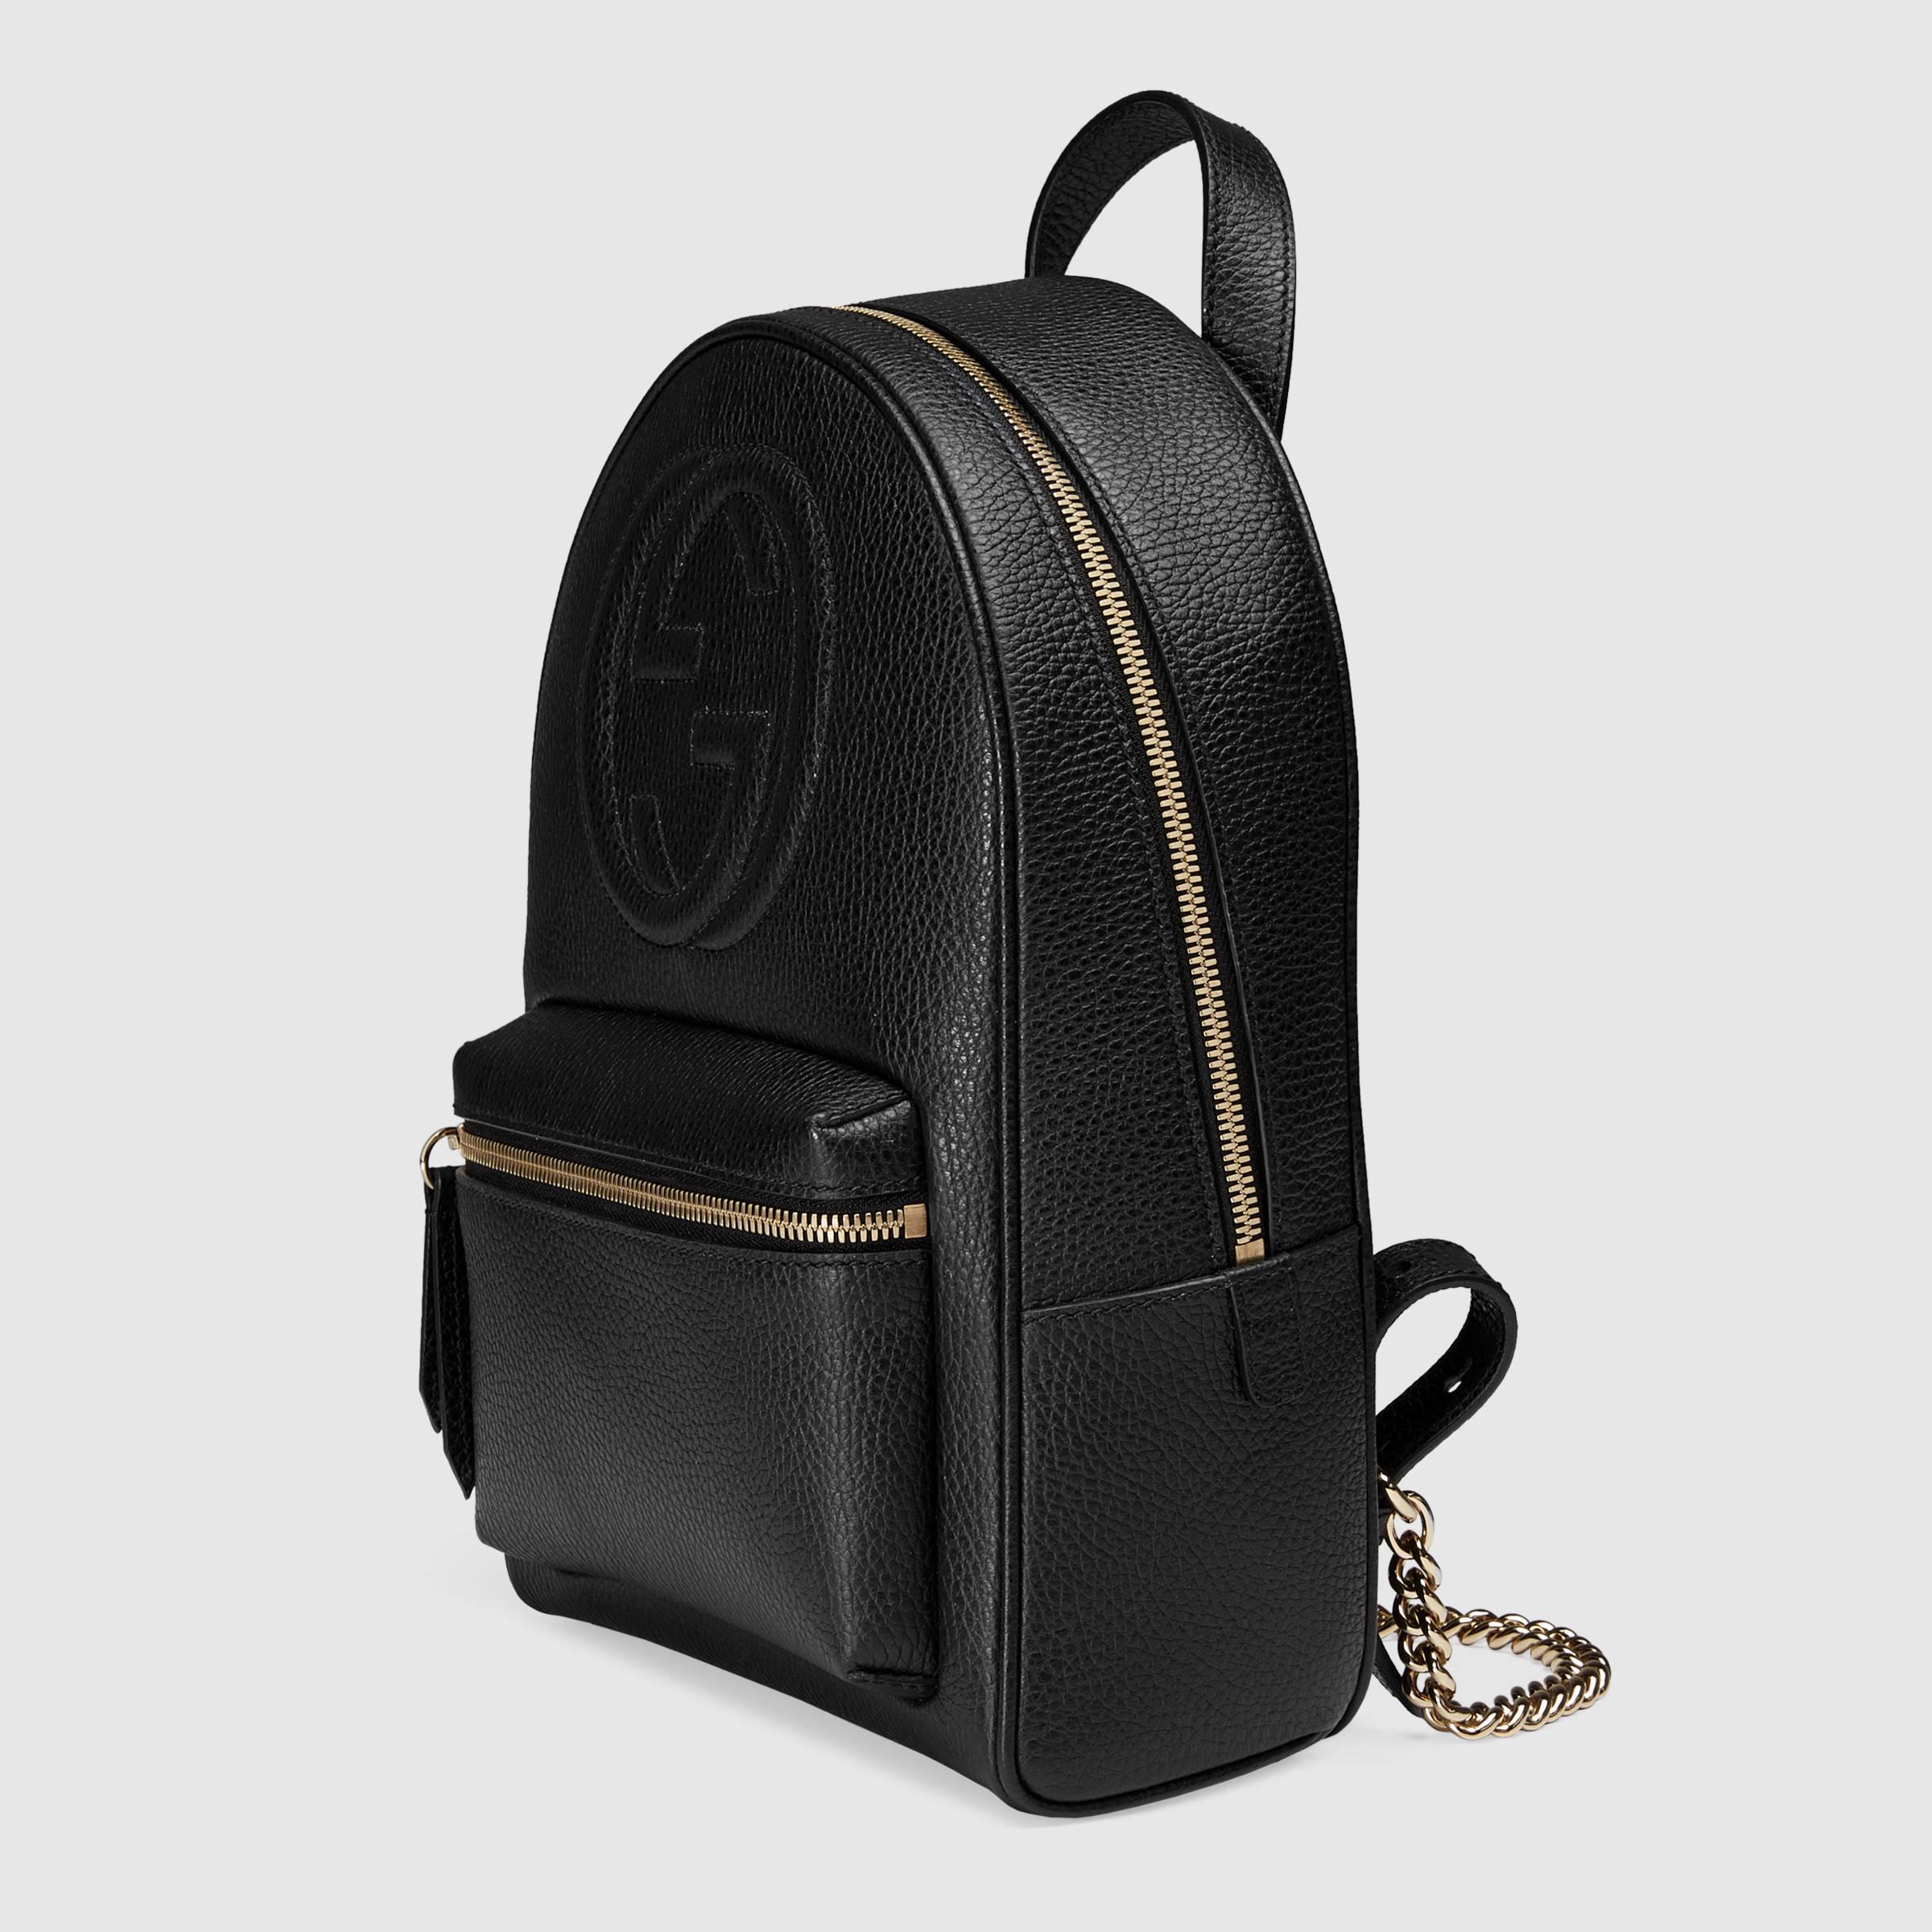 Gucci Soho Leather Chain Backpack in Black | Lyst UK